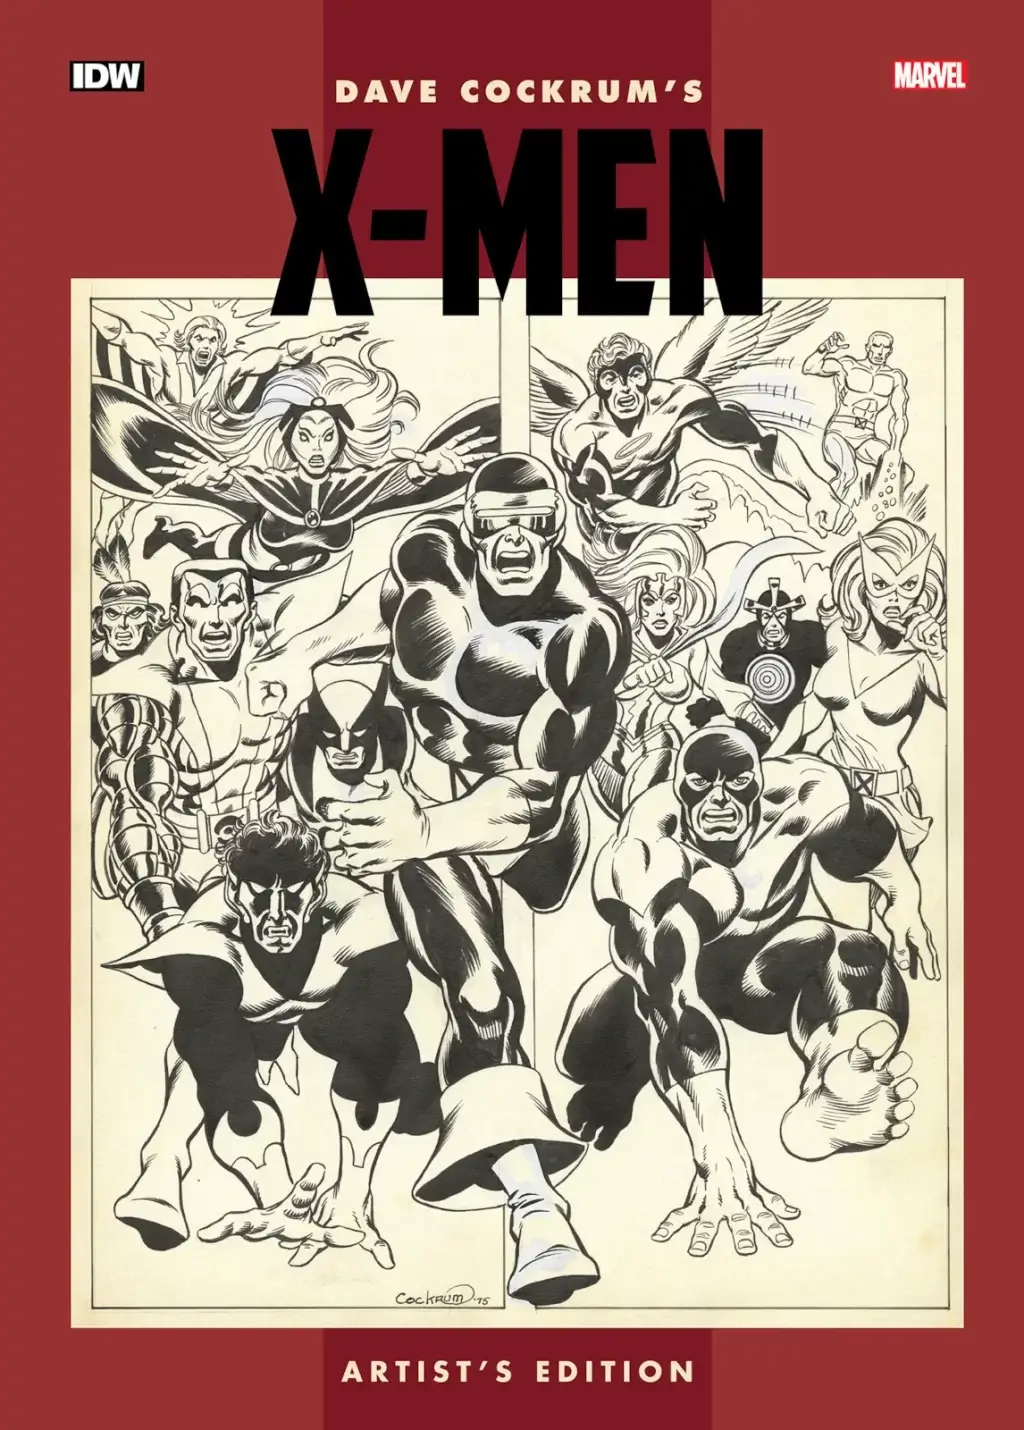 Dave Cockrums X Men Artists Edition cover